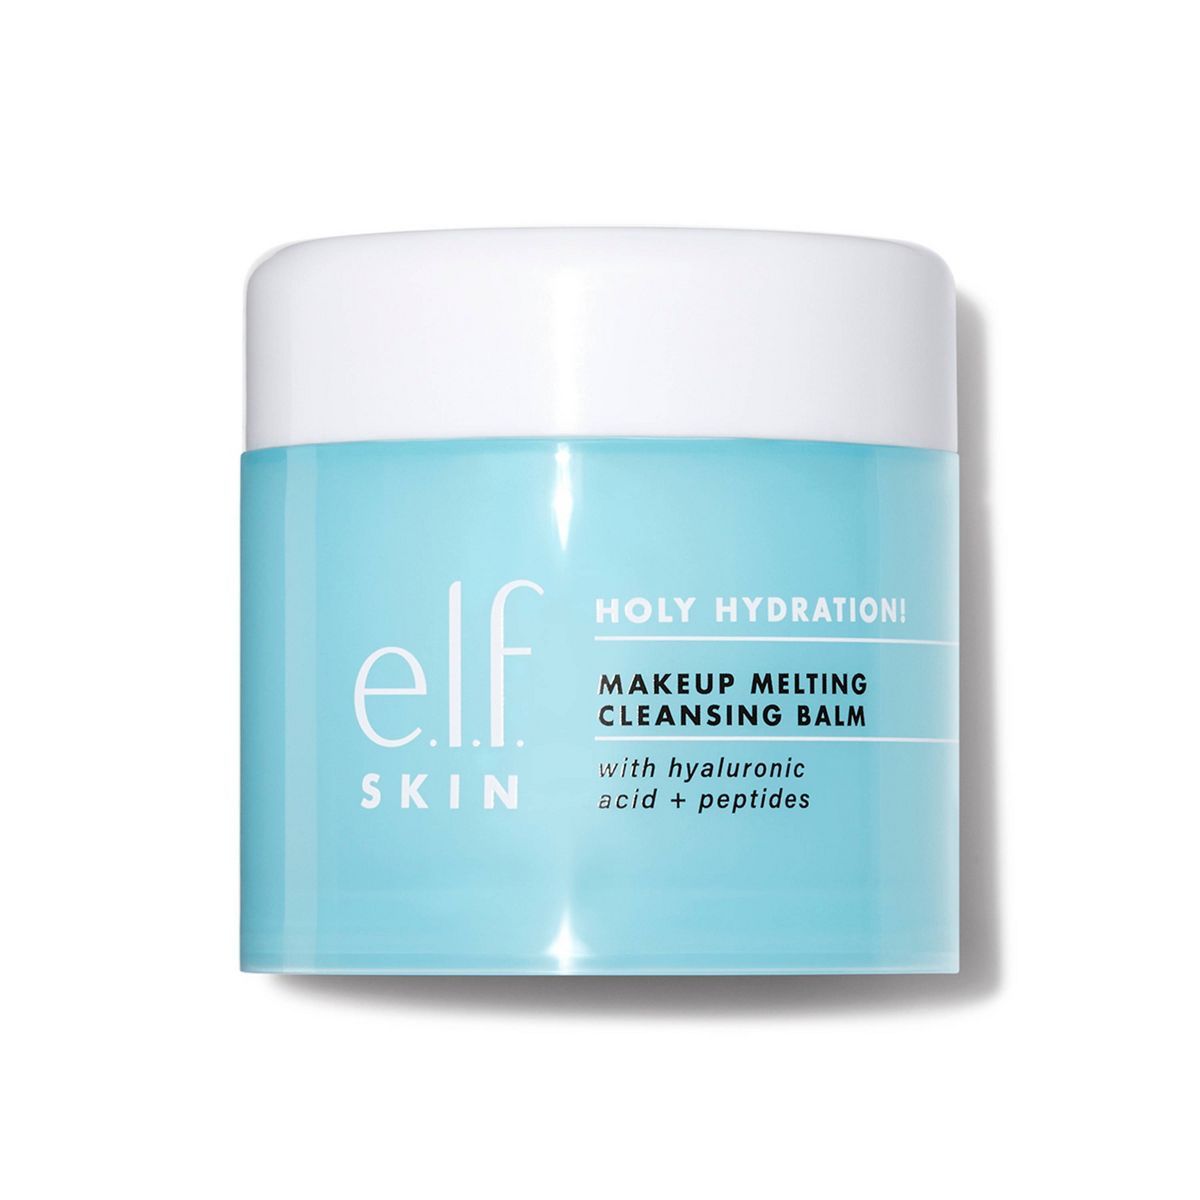 e.l.f. Holy Hydration! Makeup Melting Scented Cleansing Balm - 2oz | Target